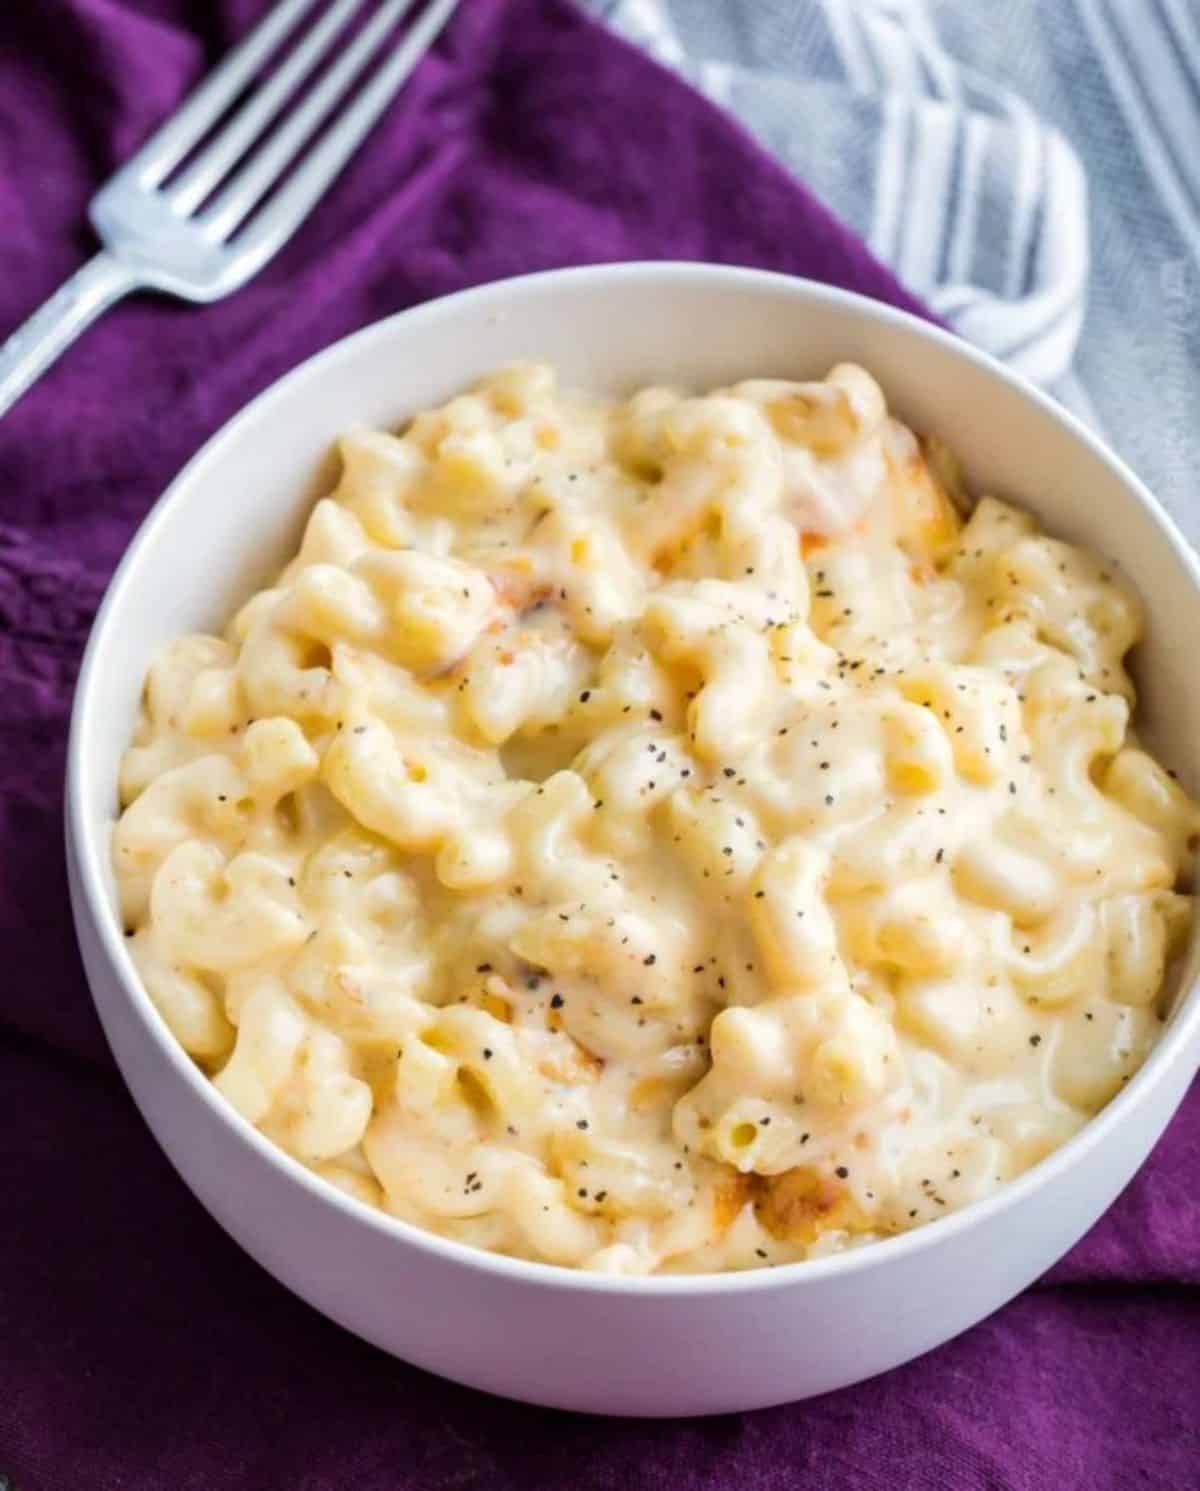 Delicious macaroni and cheese in a white bowl.